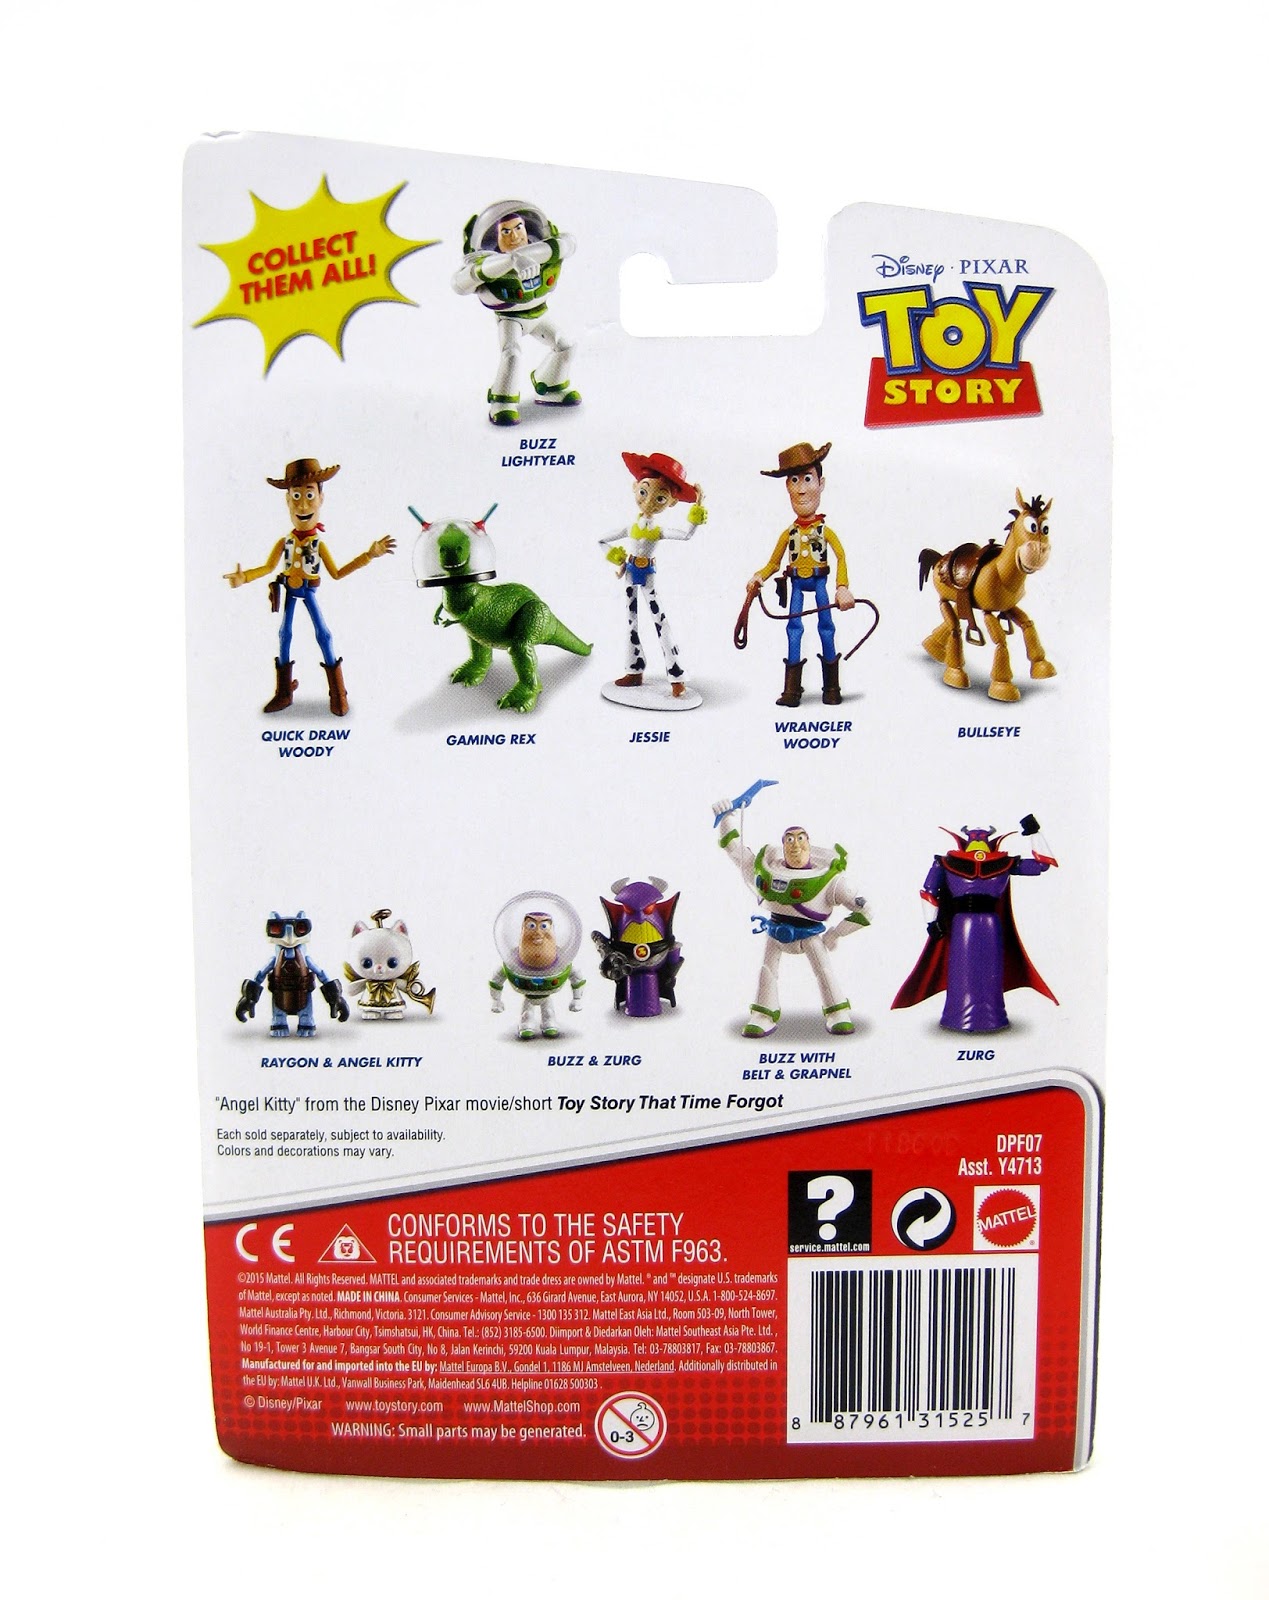 toy story that time forgot characters